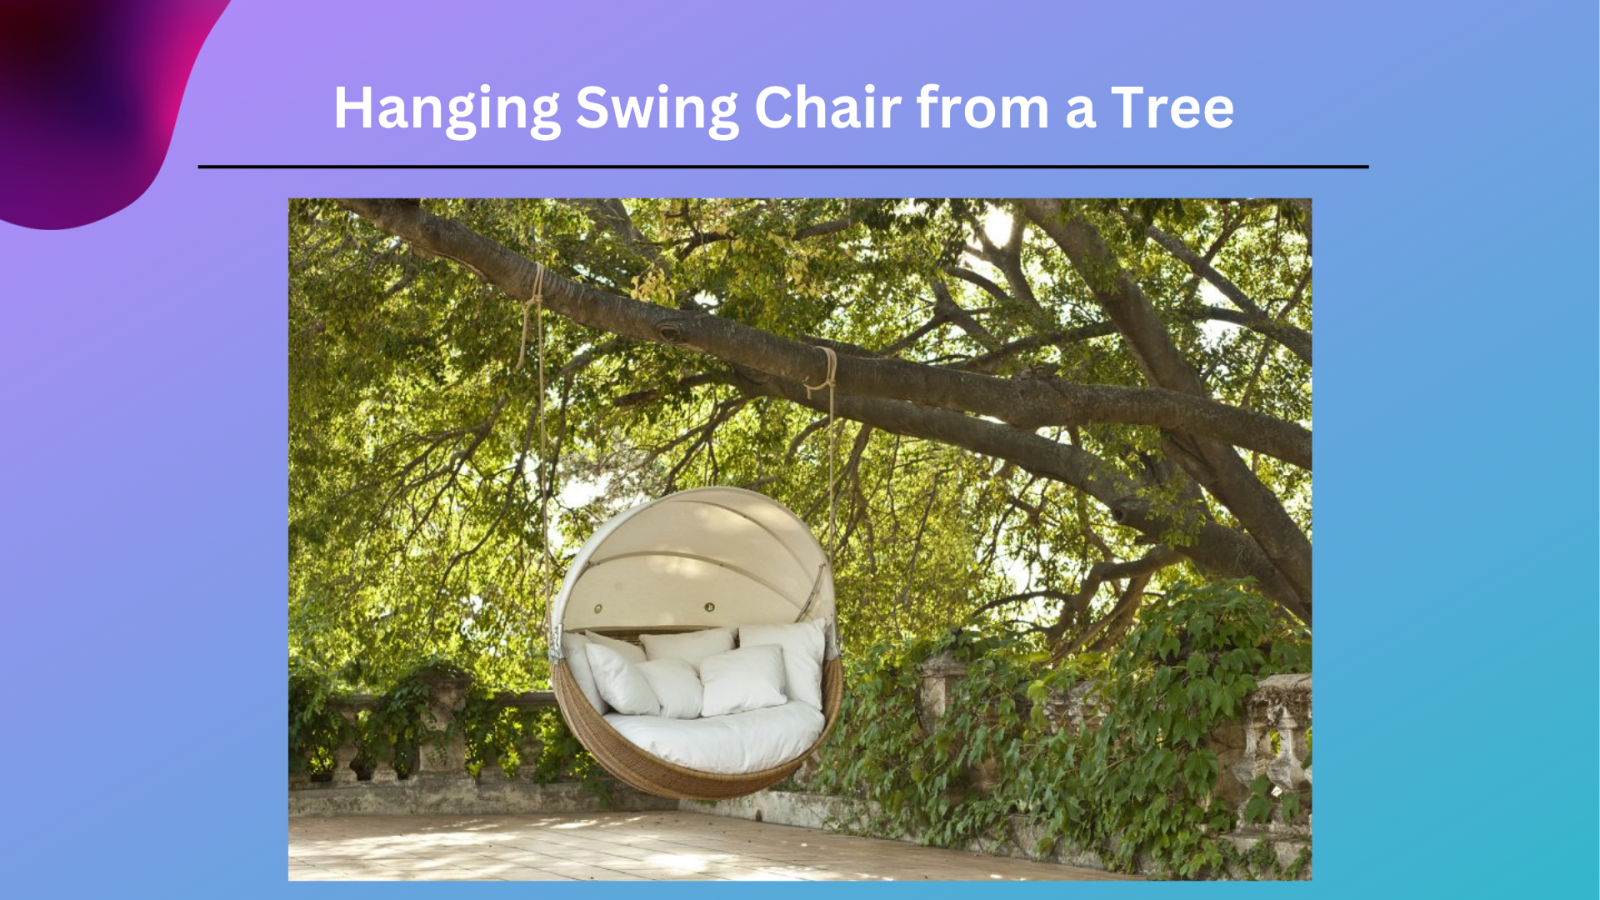 Hanging Swing Chair from a Tree